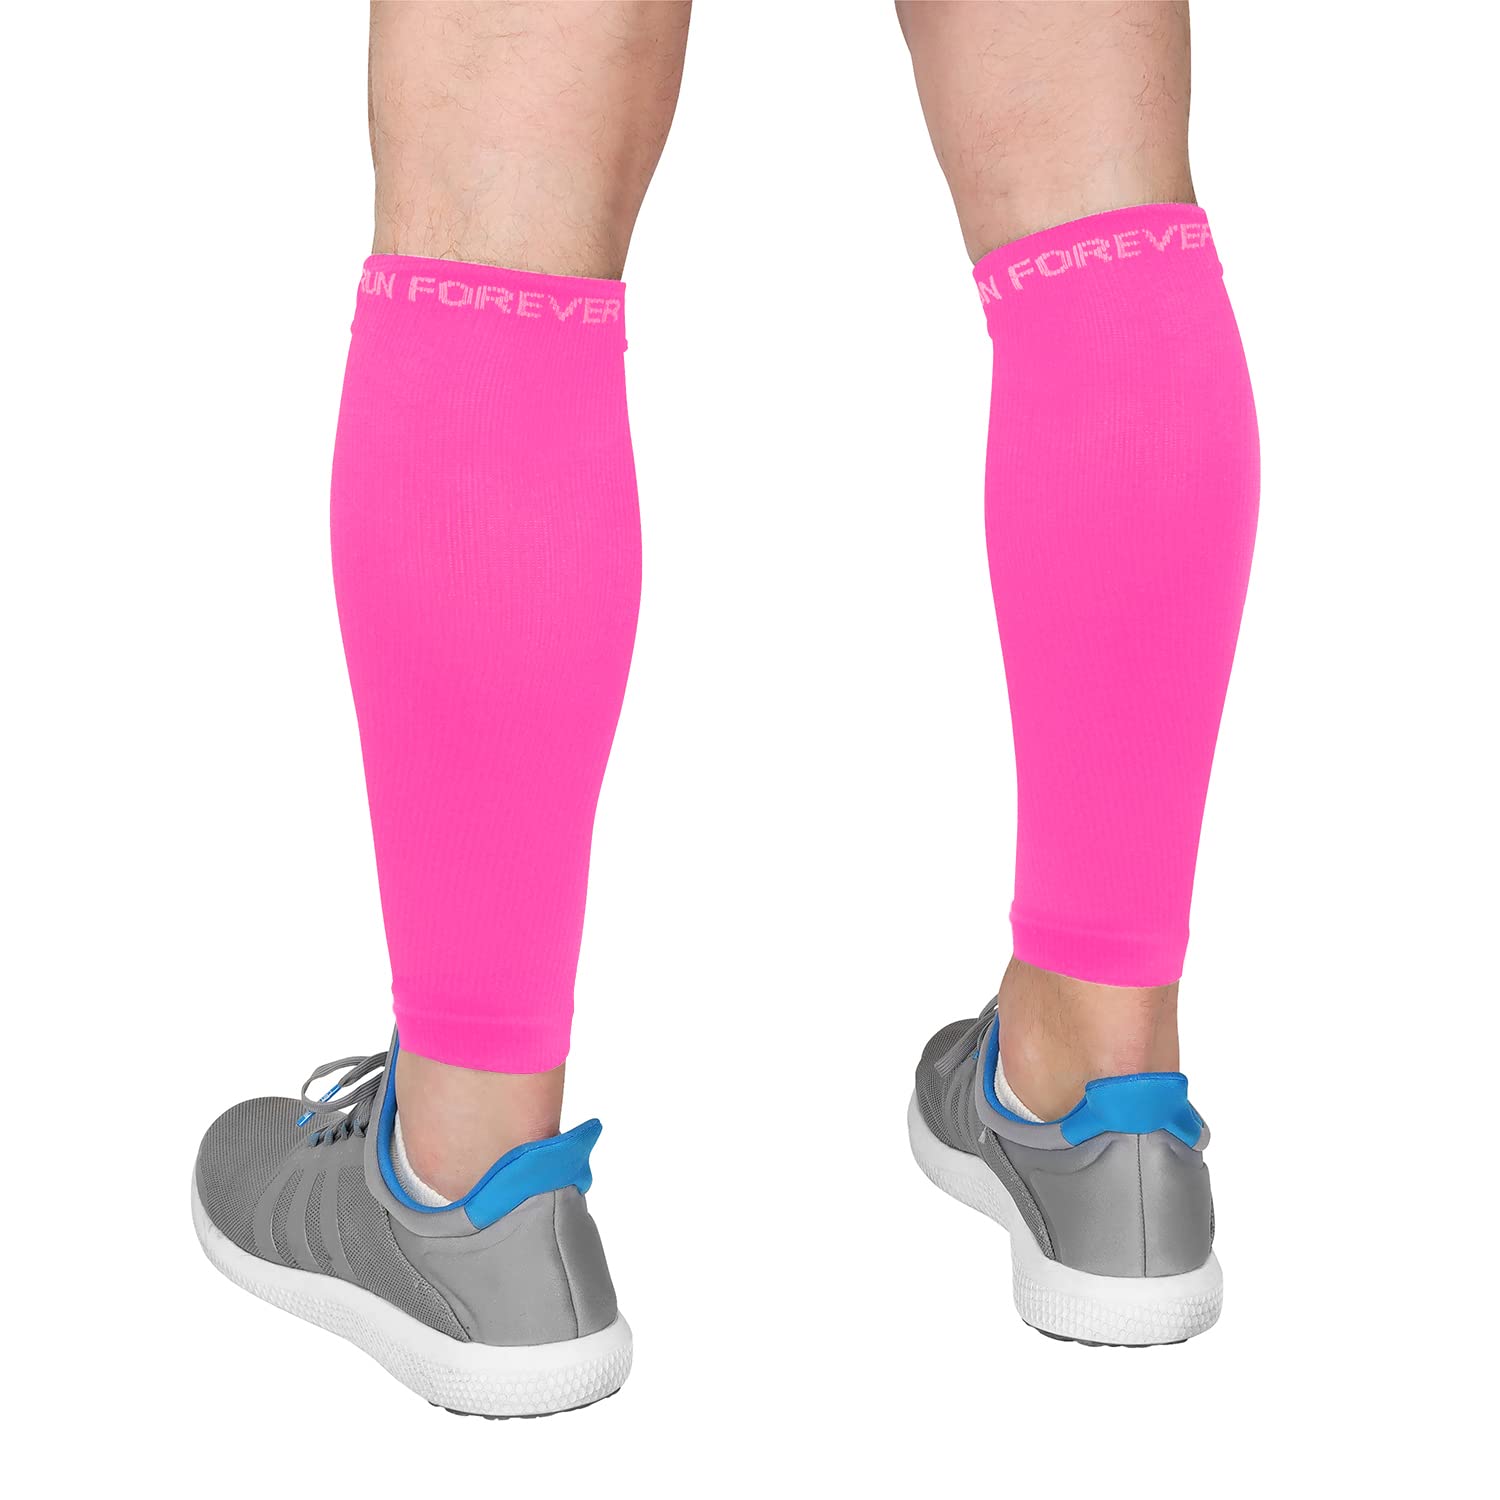 Buy Run Forever Calf Compression Sleeves For Men And Women - Leg  Compression Sleeve - Calf Brace For Running, Cycling, Travel